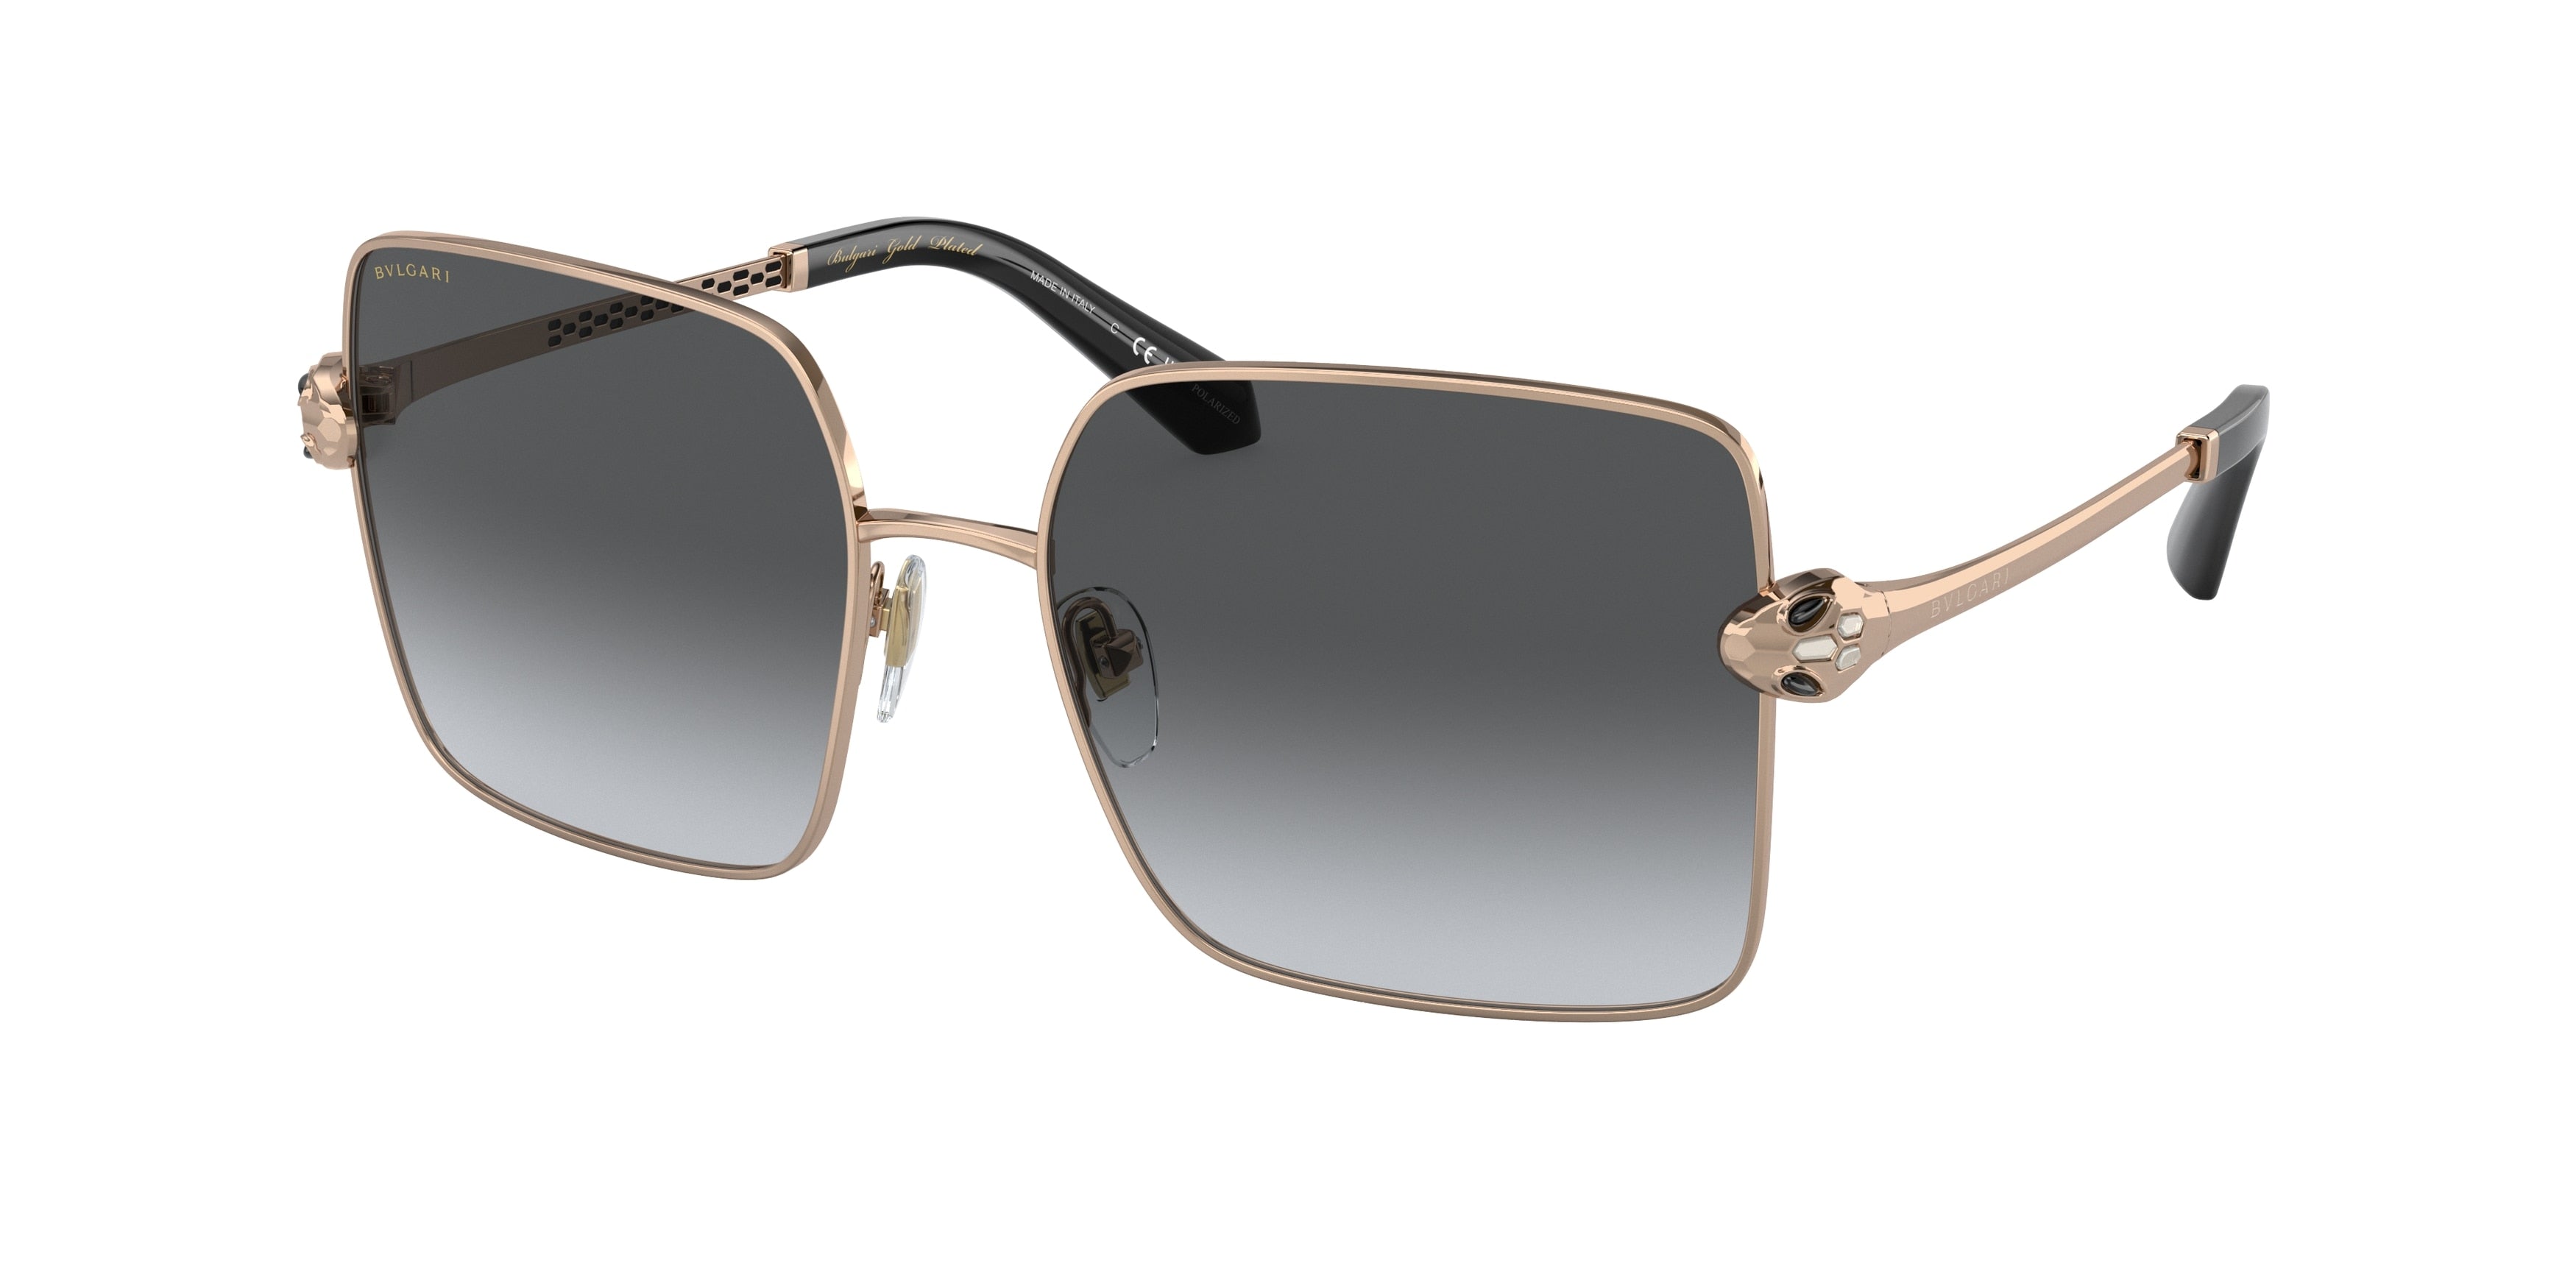 Bvlgari BV6180KB Square Sunglasses  2014T3-Pink Gold Plated 57-140-17 - Color Map Pink